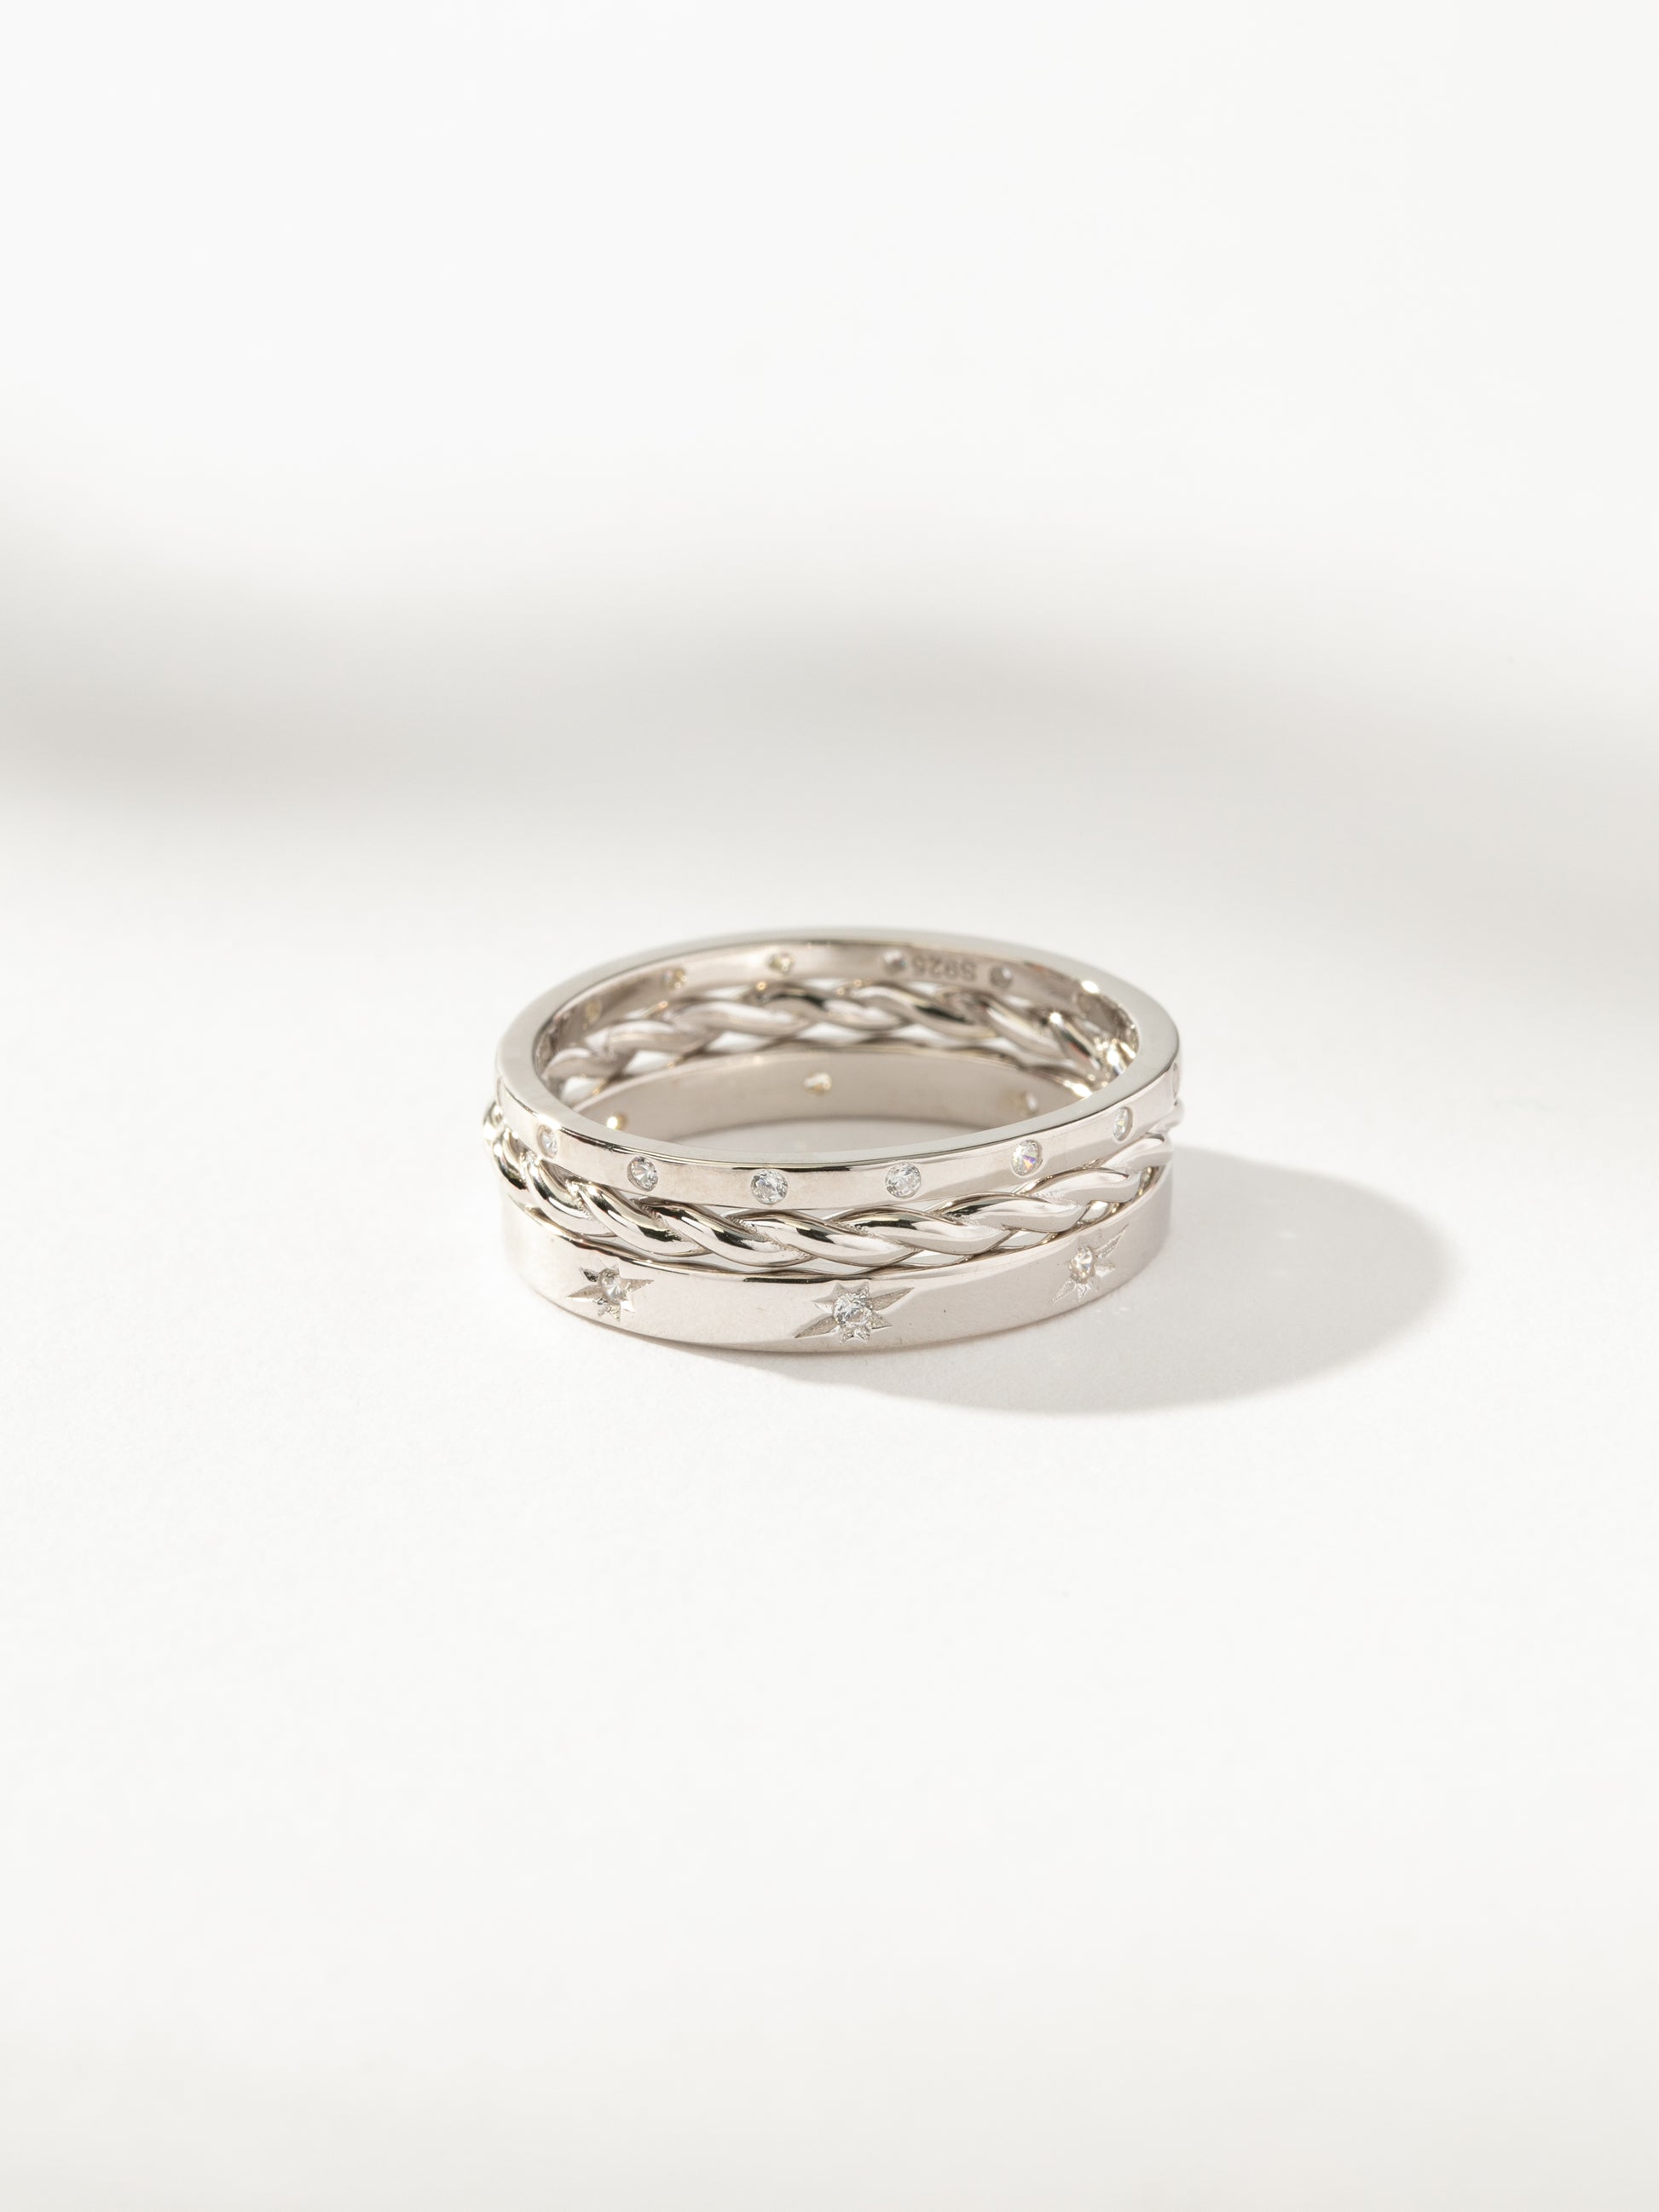 Triad Ring | Sterling Silver | Product Image | Uncommon James